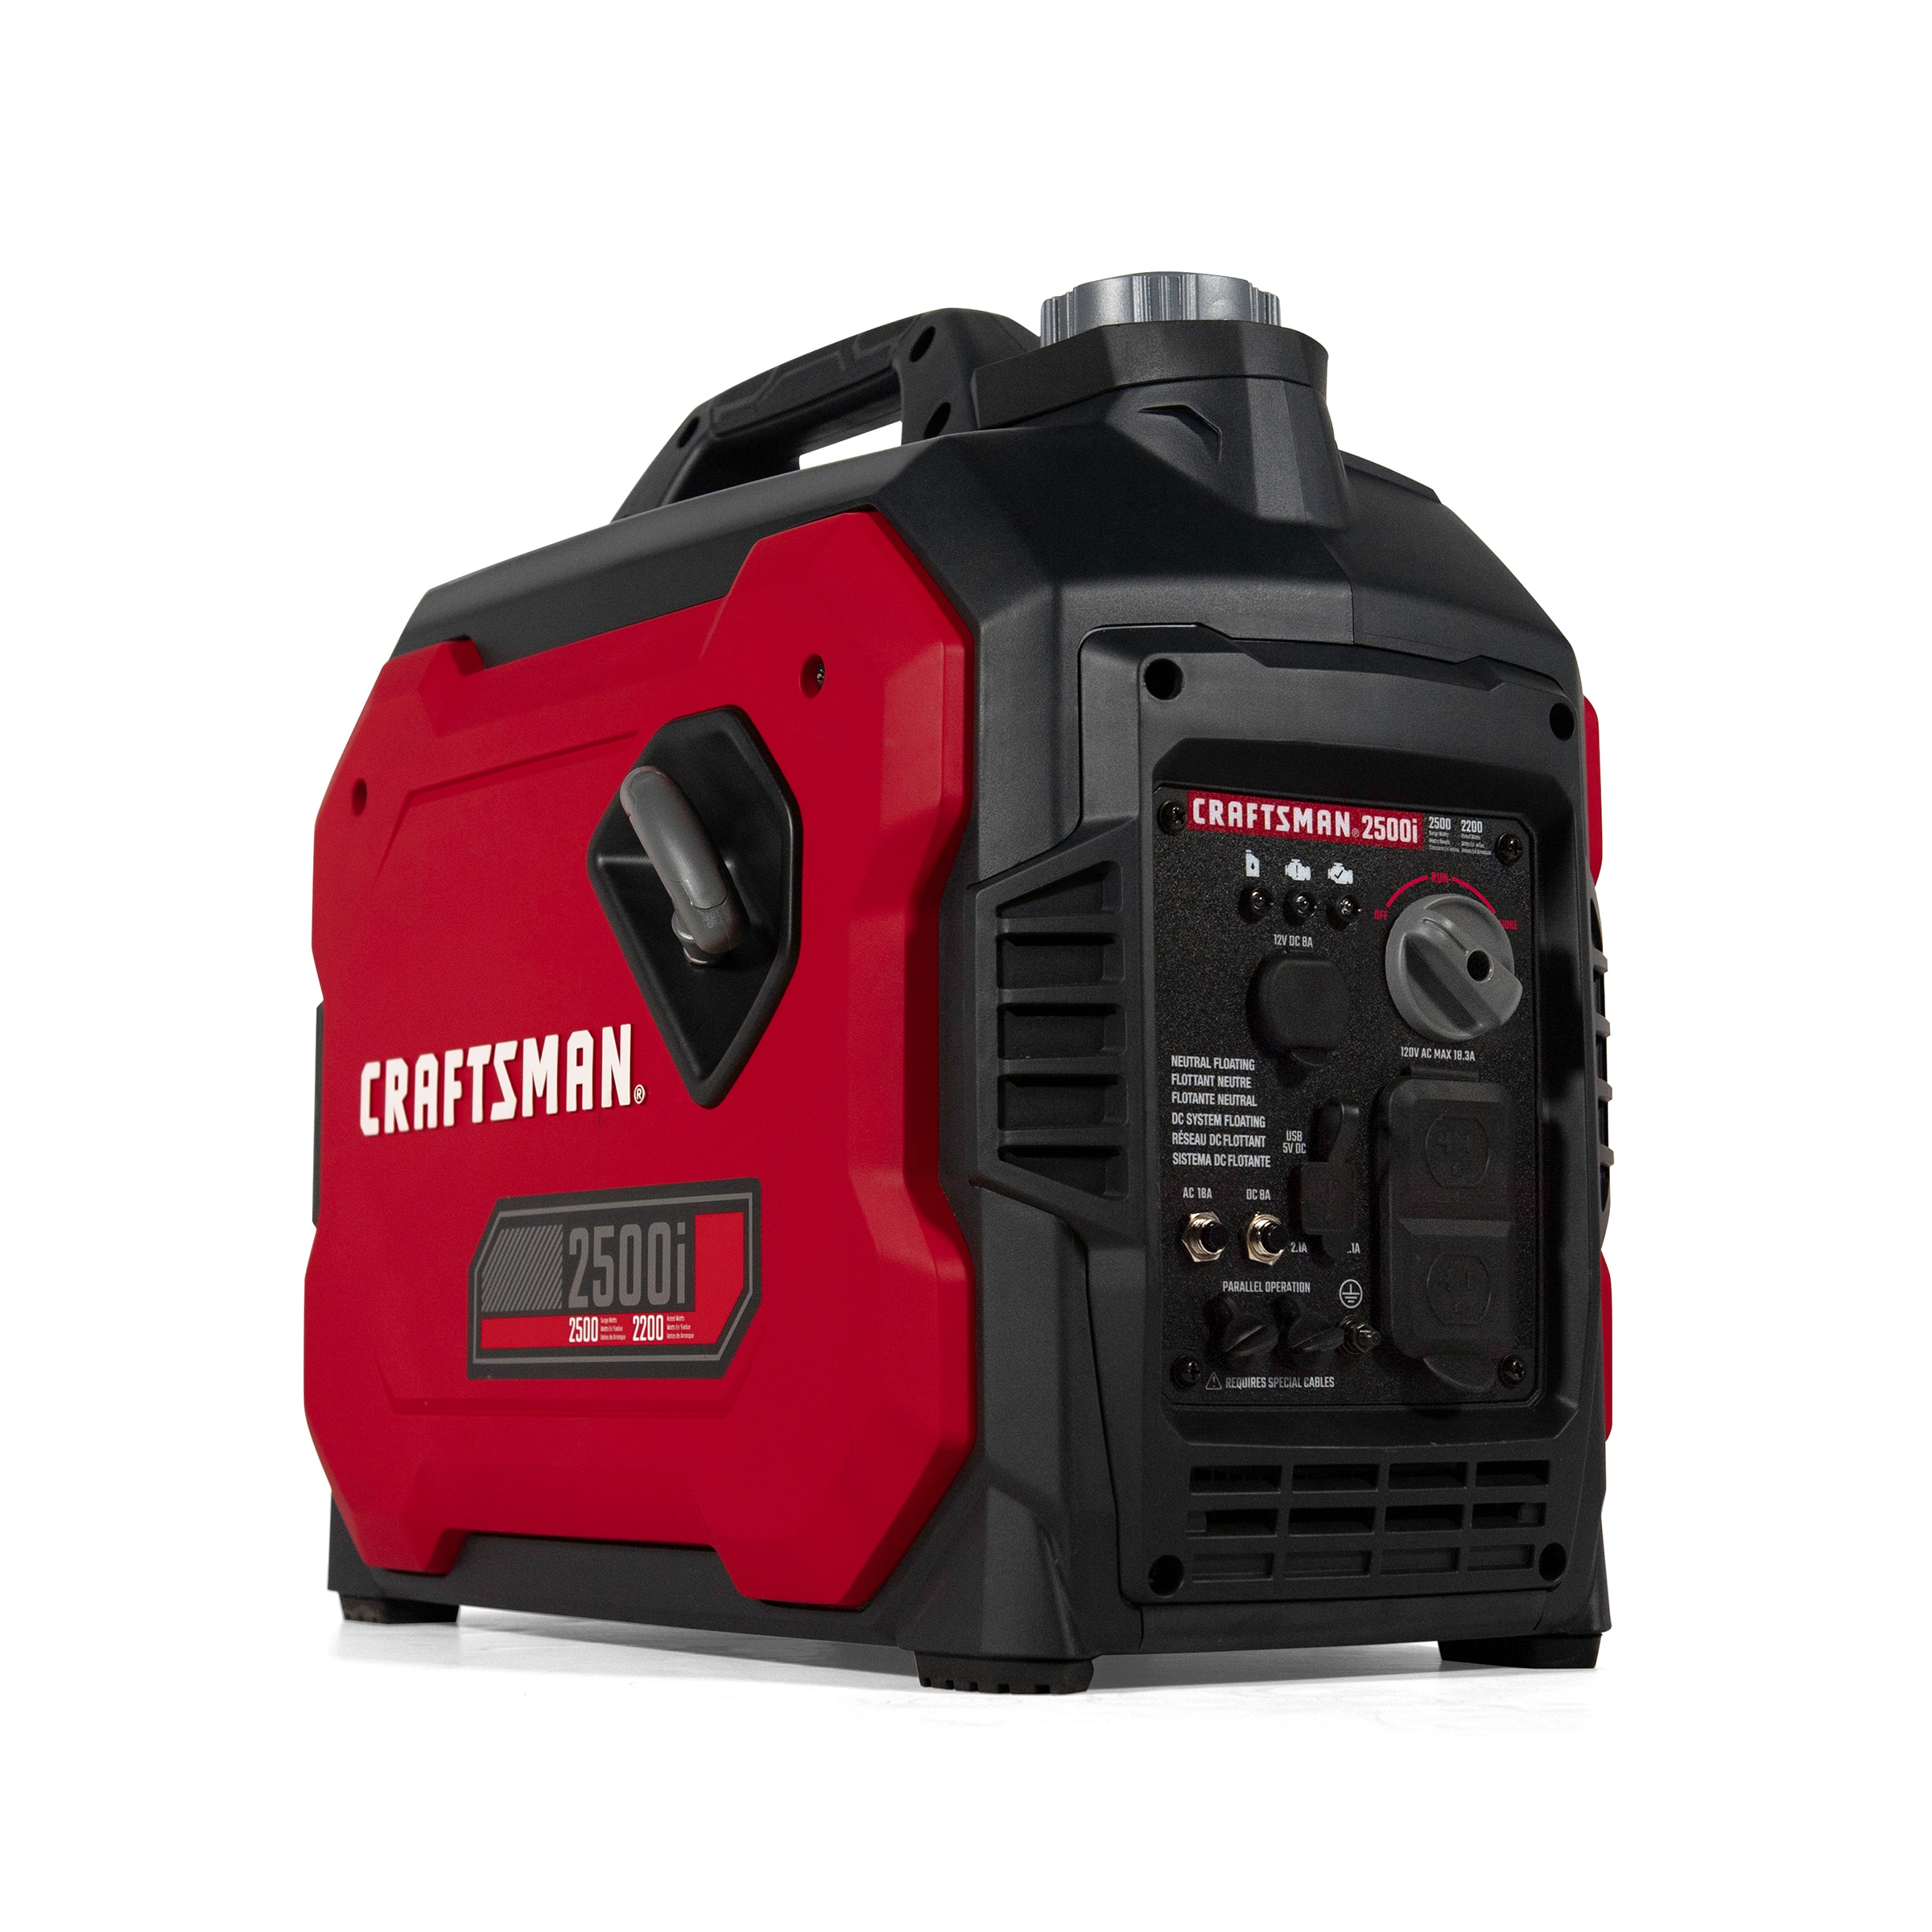 Features Of The Craftsman Generator 2500